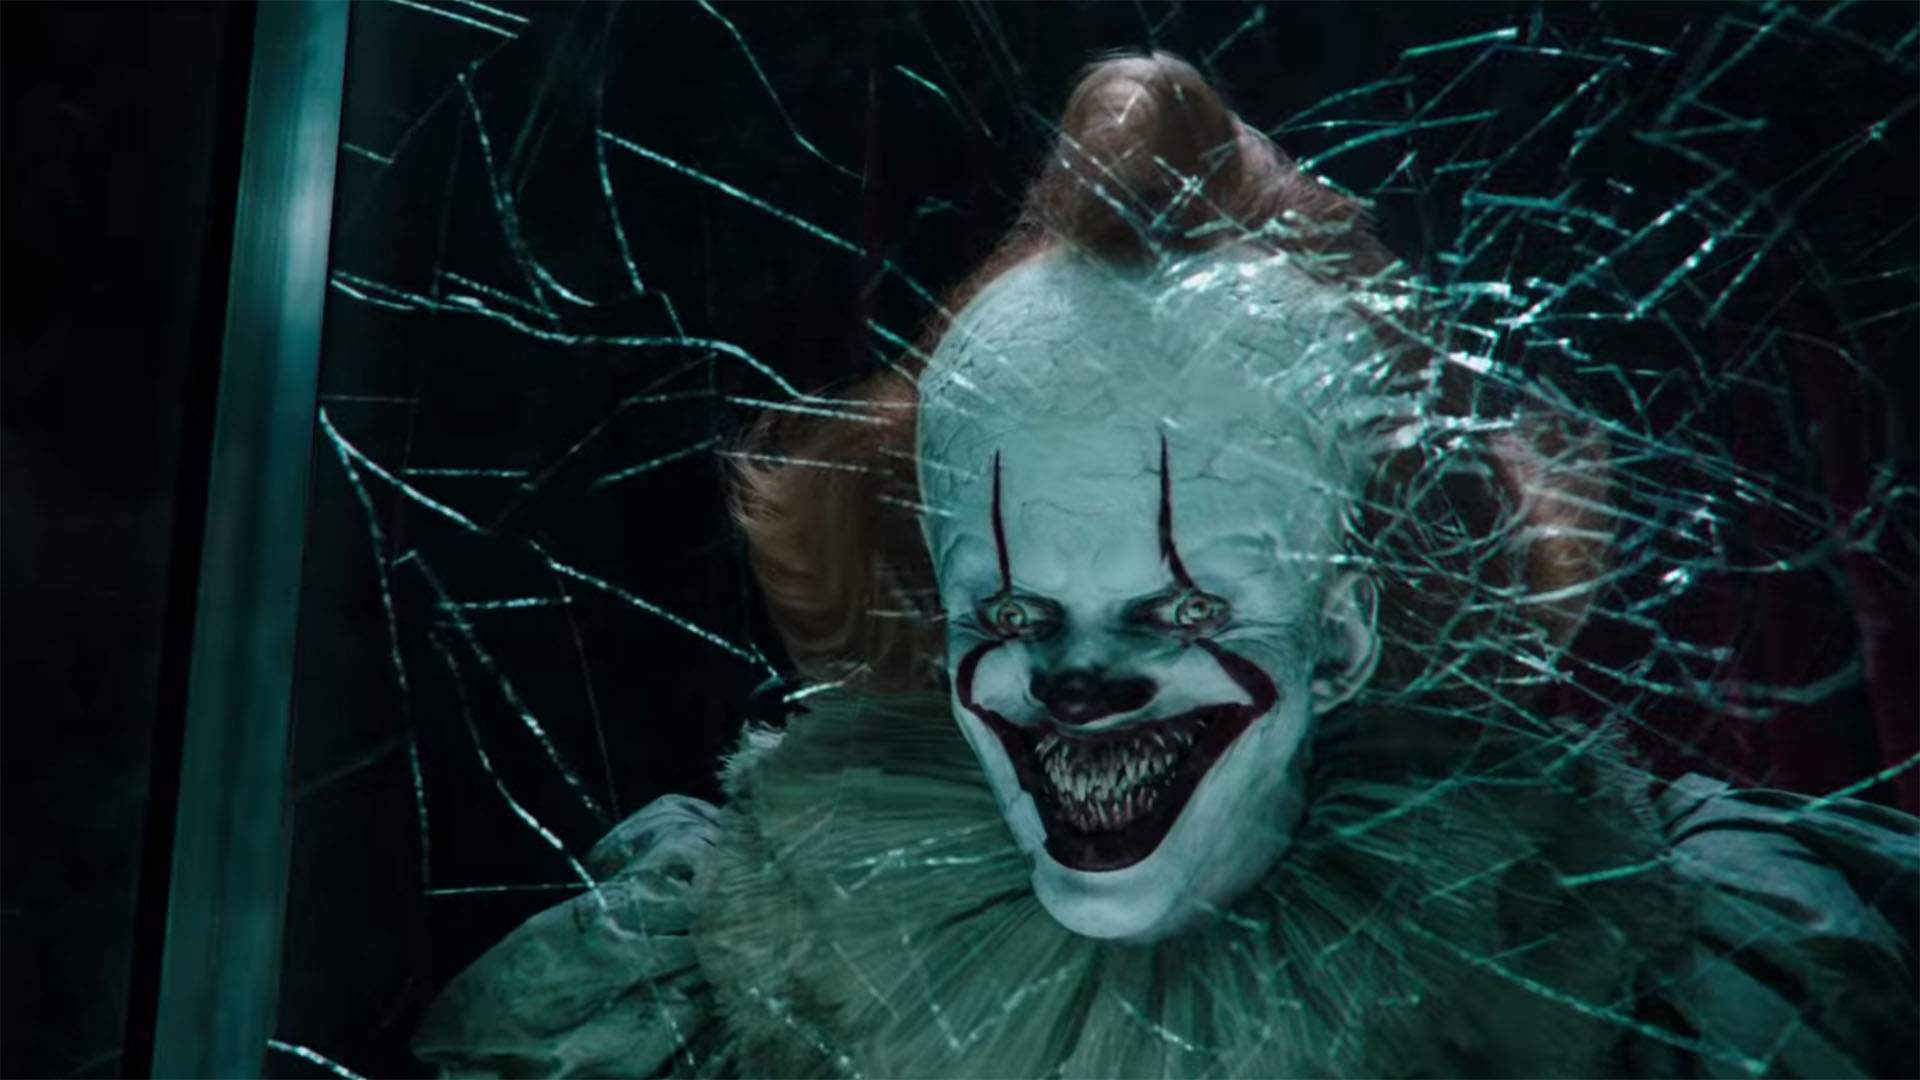 The Intense New 'IT: Chapter Two' Trailer Is Here With More Clowns and More Sewer Mayhem